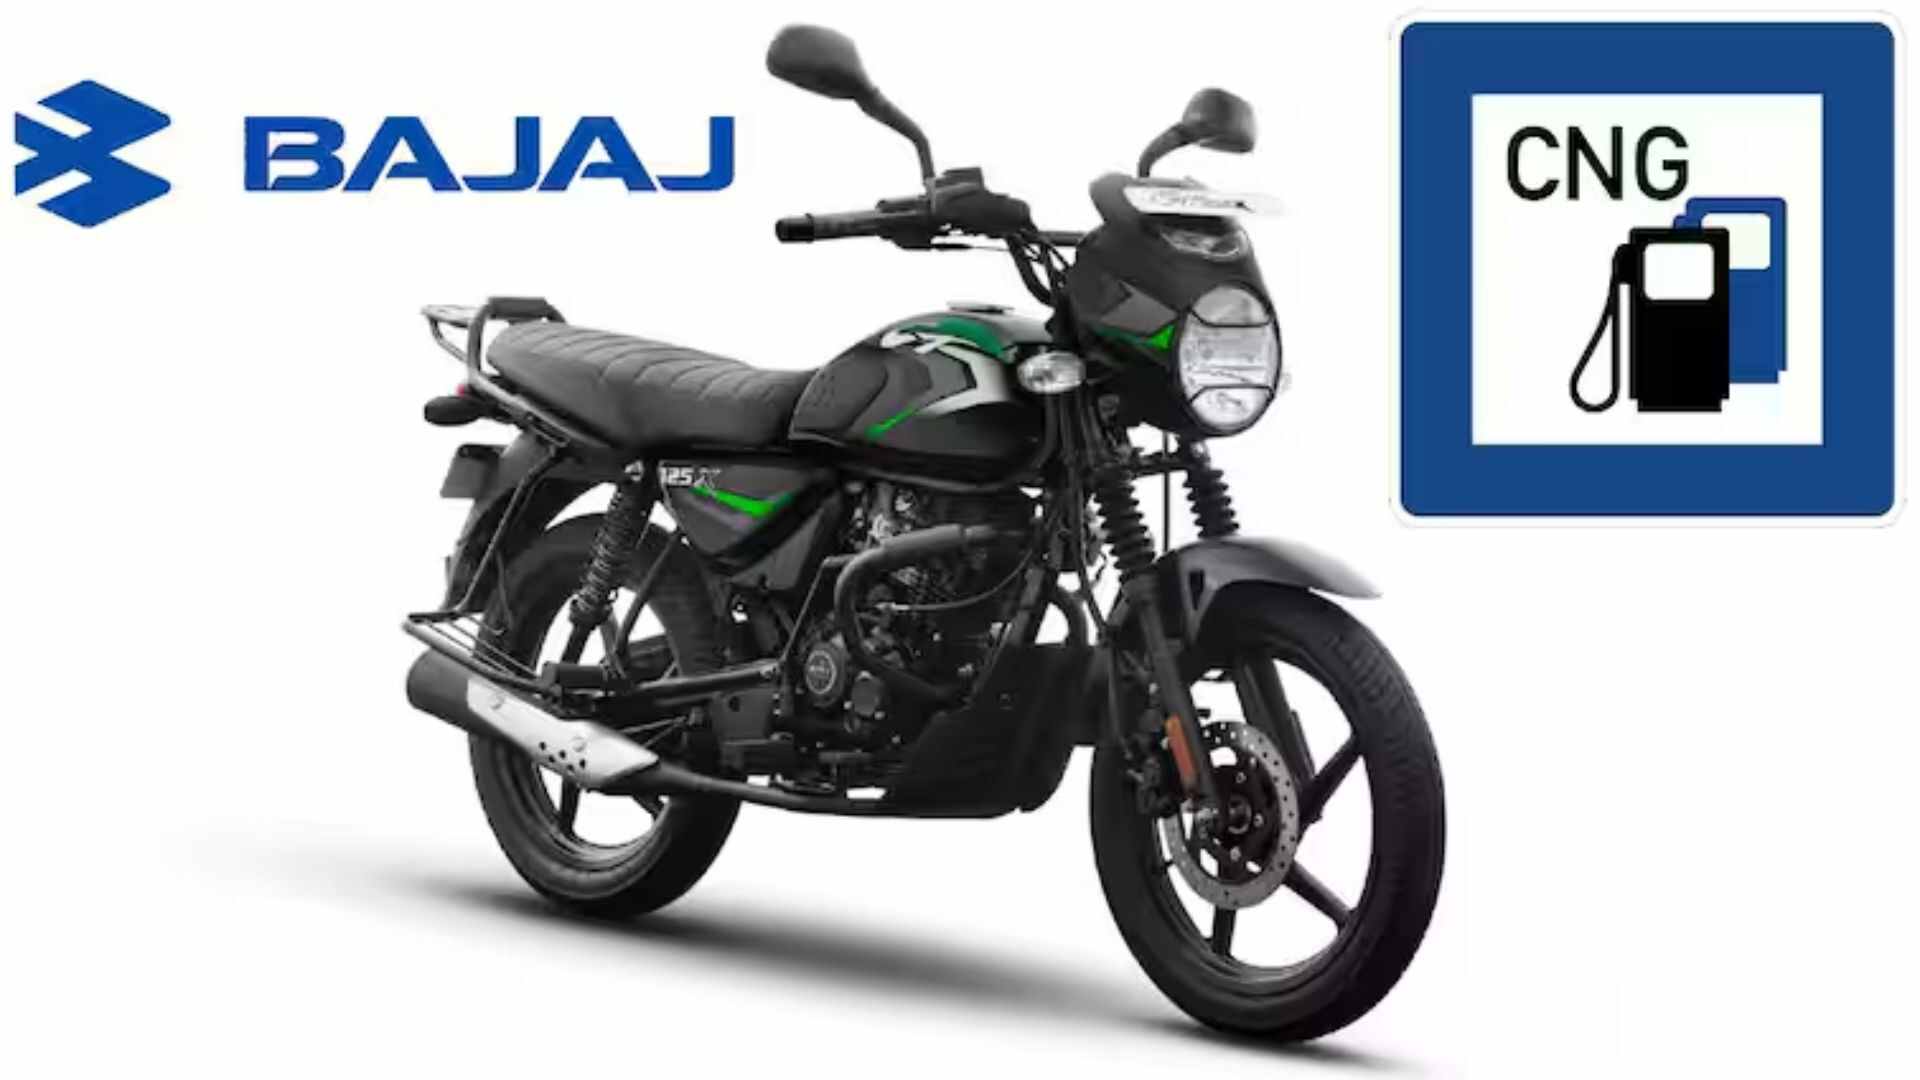 Bajaj Debuts World’s First CNG Motorcycle On July 5